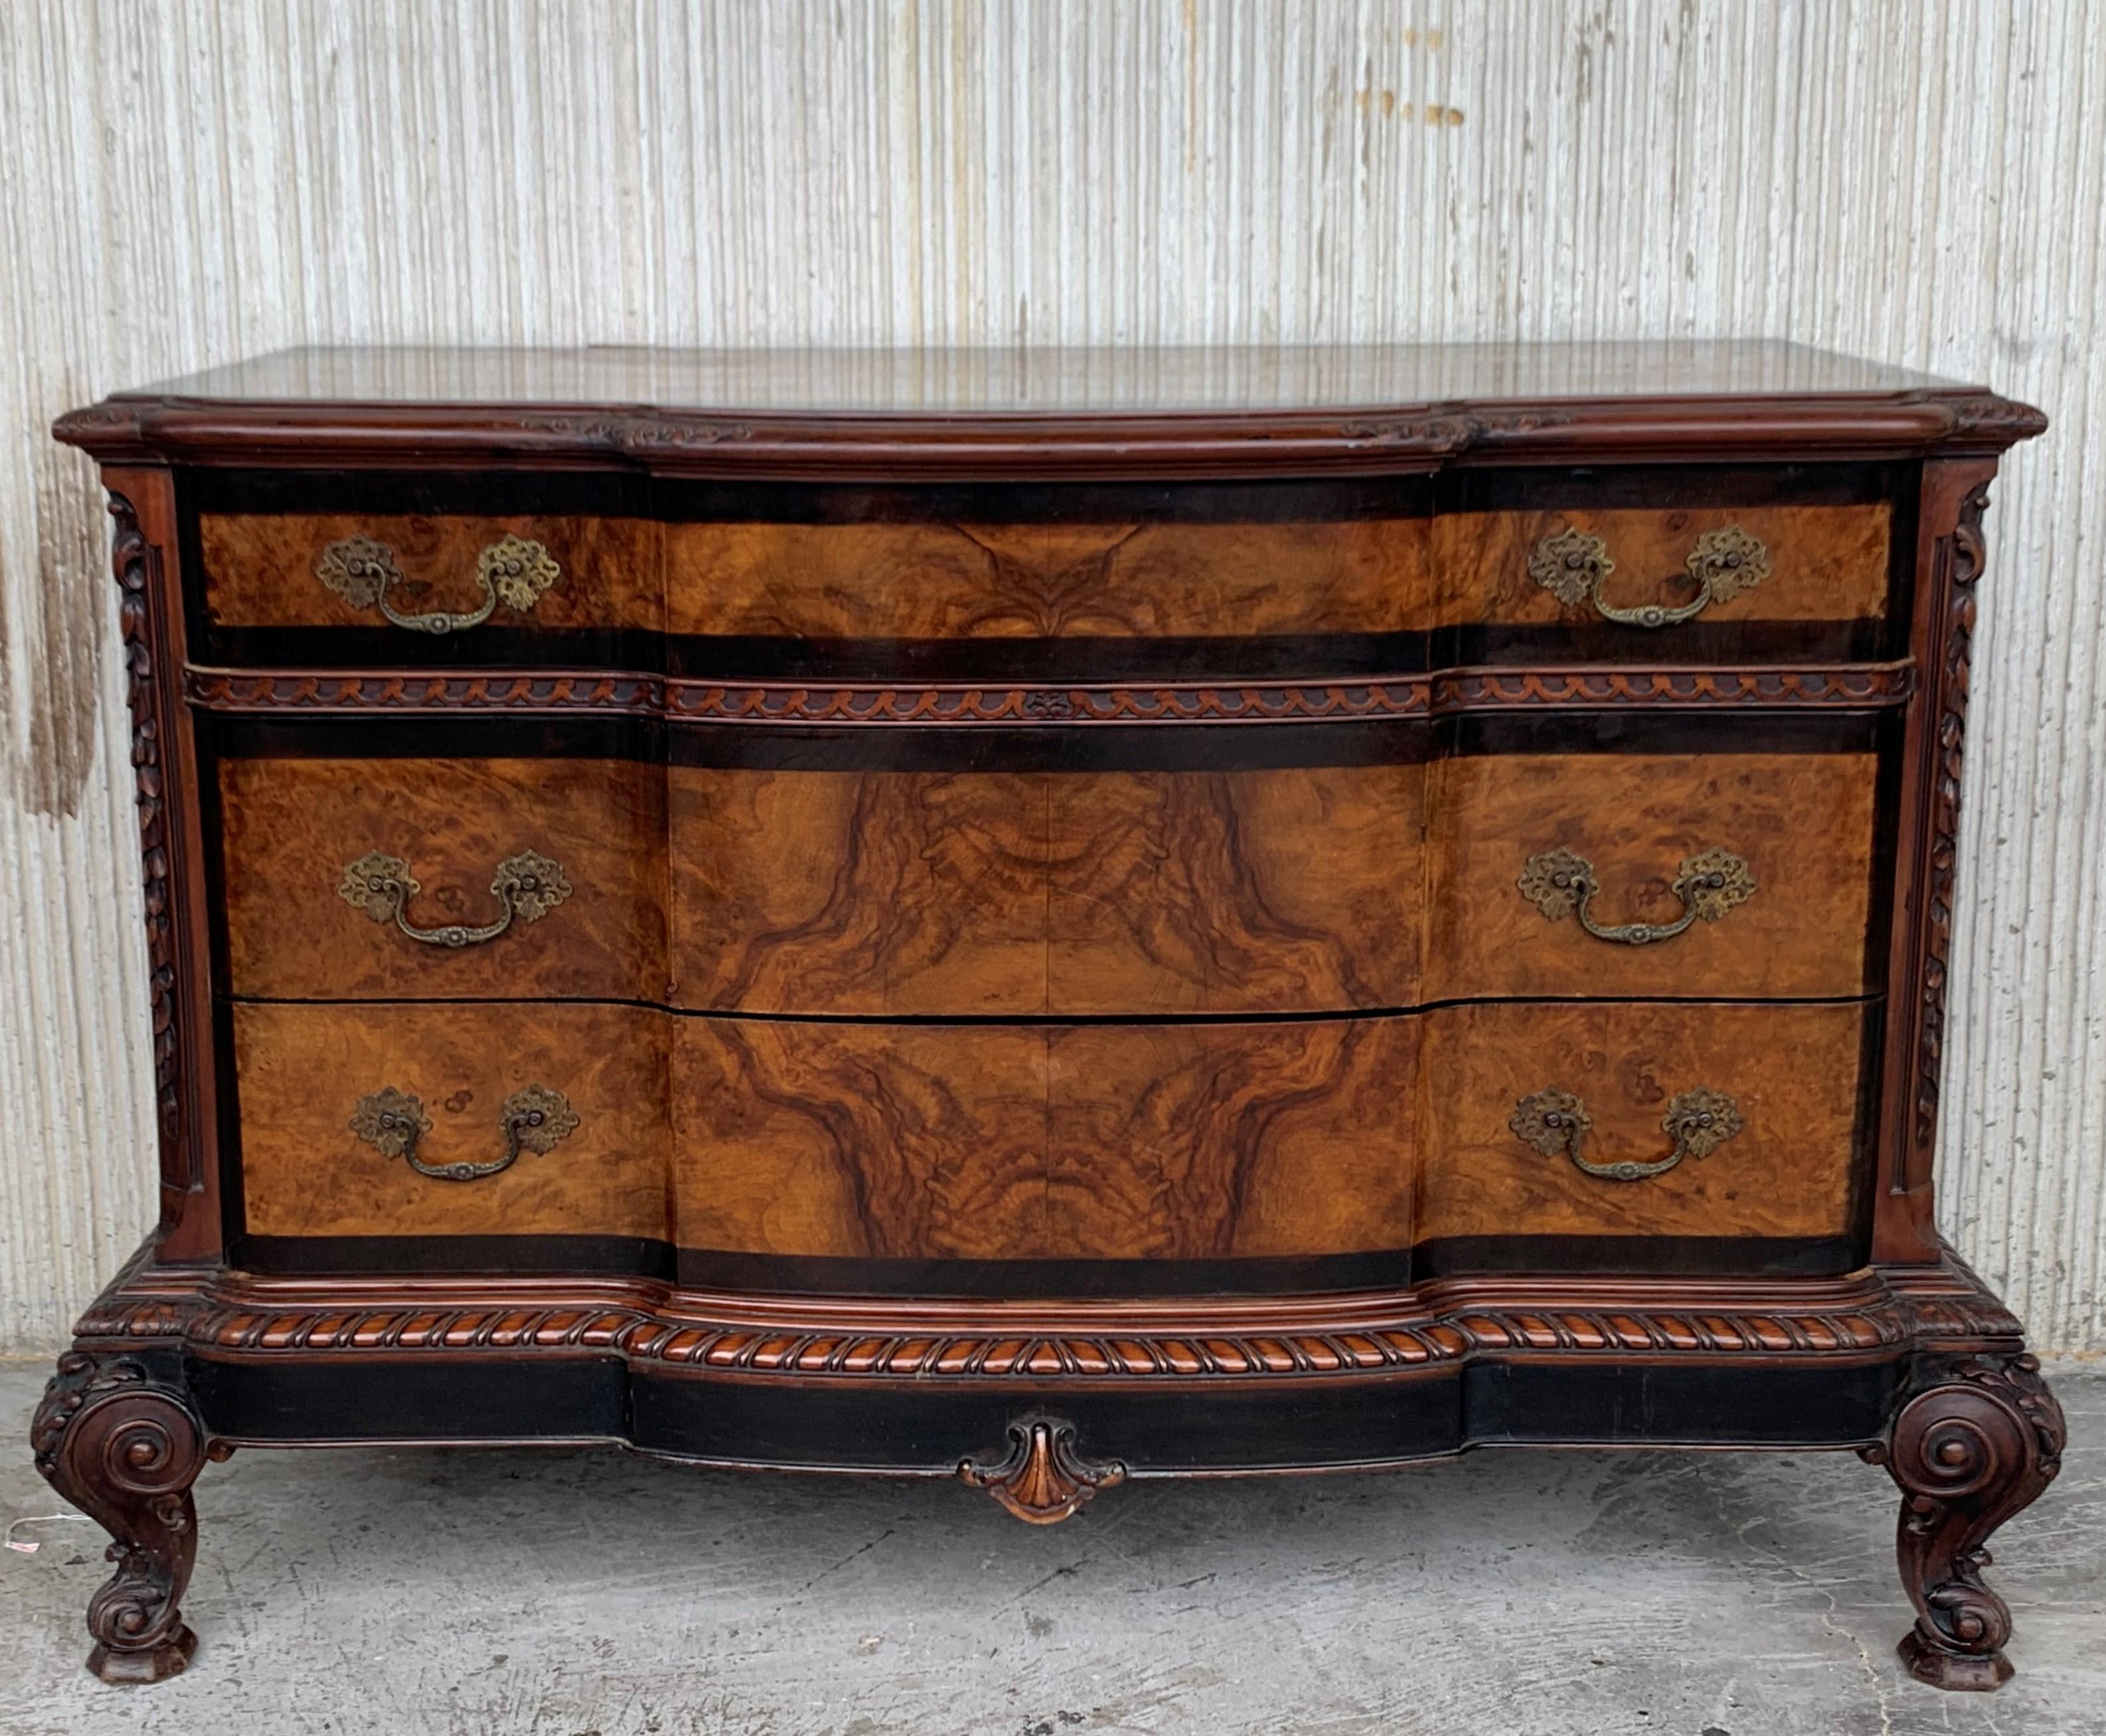 A elegant serpentine Venetian 1900s Baroque commode chest of drawers in ebonized hand carved walnut and walnut veneered, drawers and top with molded edges, raised on a plinth base resting on bracket feet.
Bronze burnished handles
Restored and